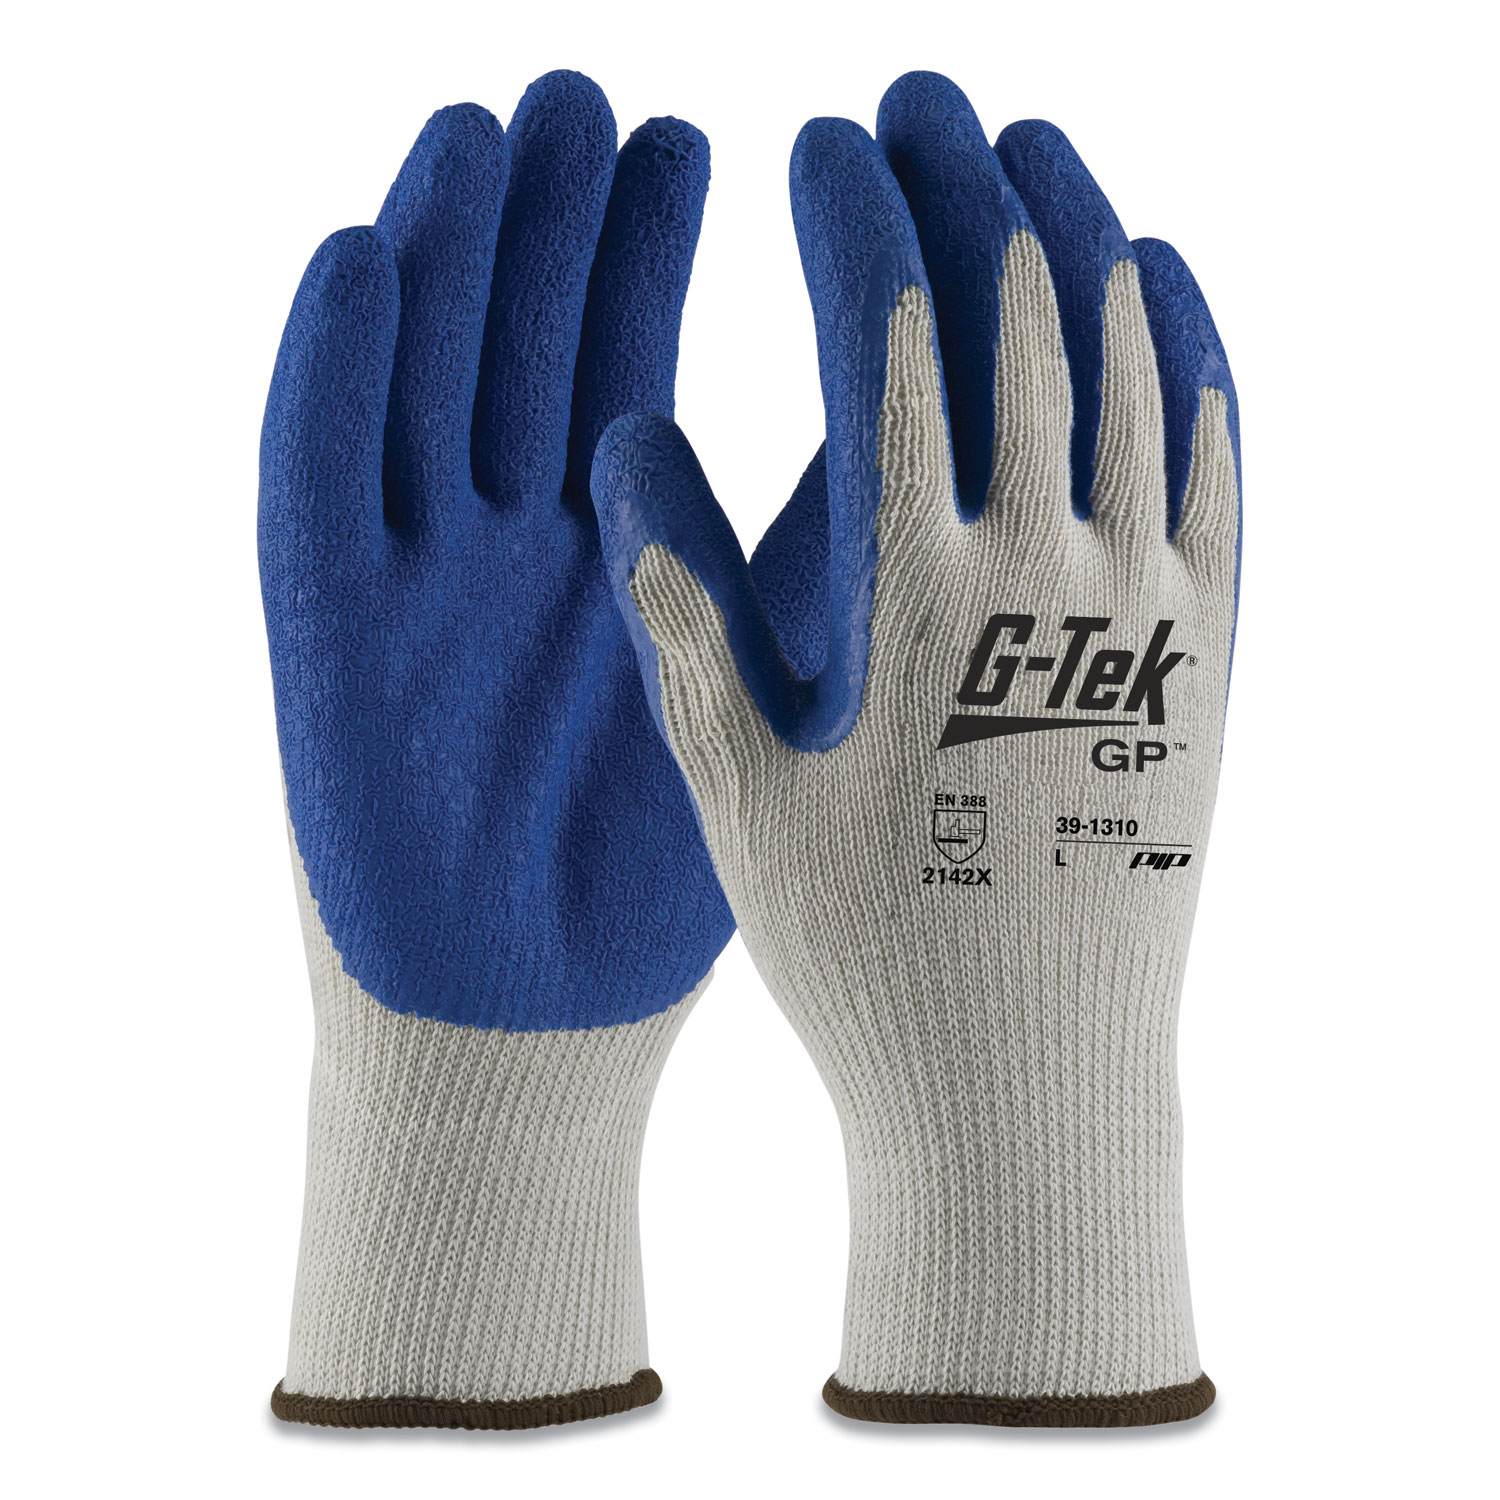  G-Tek 39-1310/L GP Latex-Coated Cotton/Polyester Gloves, Large, Gray/Blue, 12 Pairs (PID179962) 